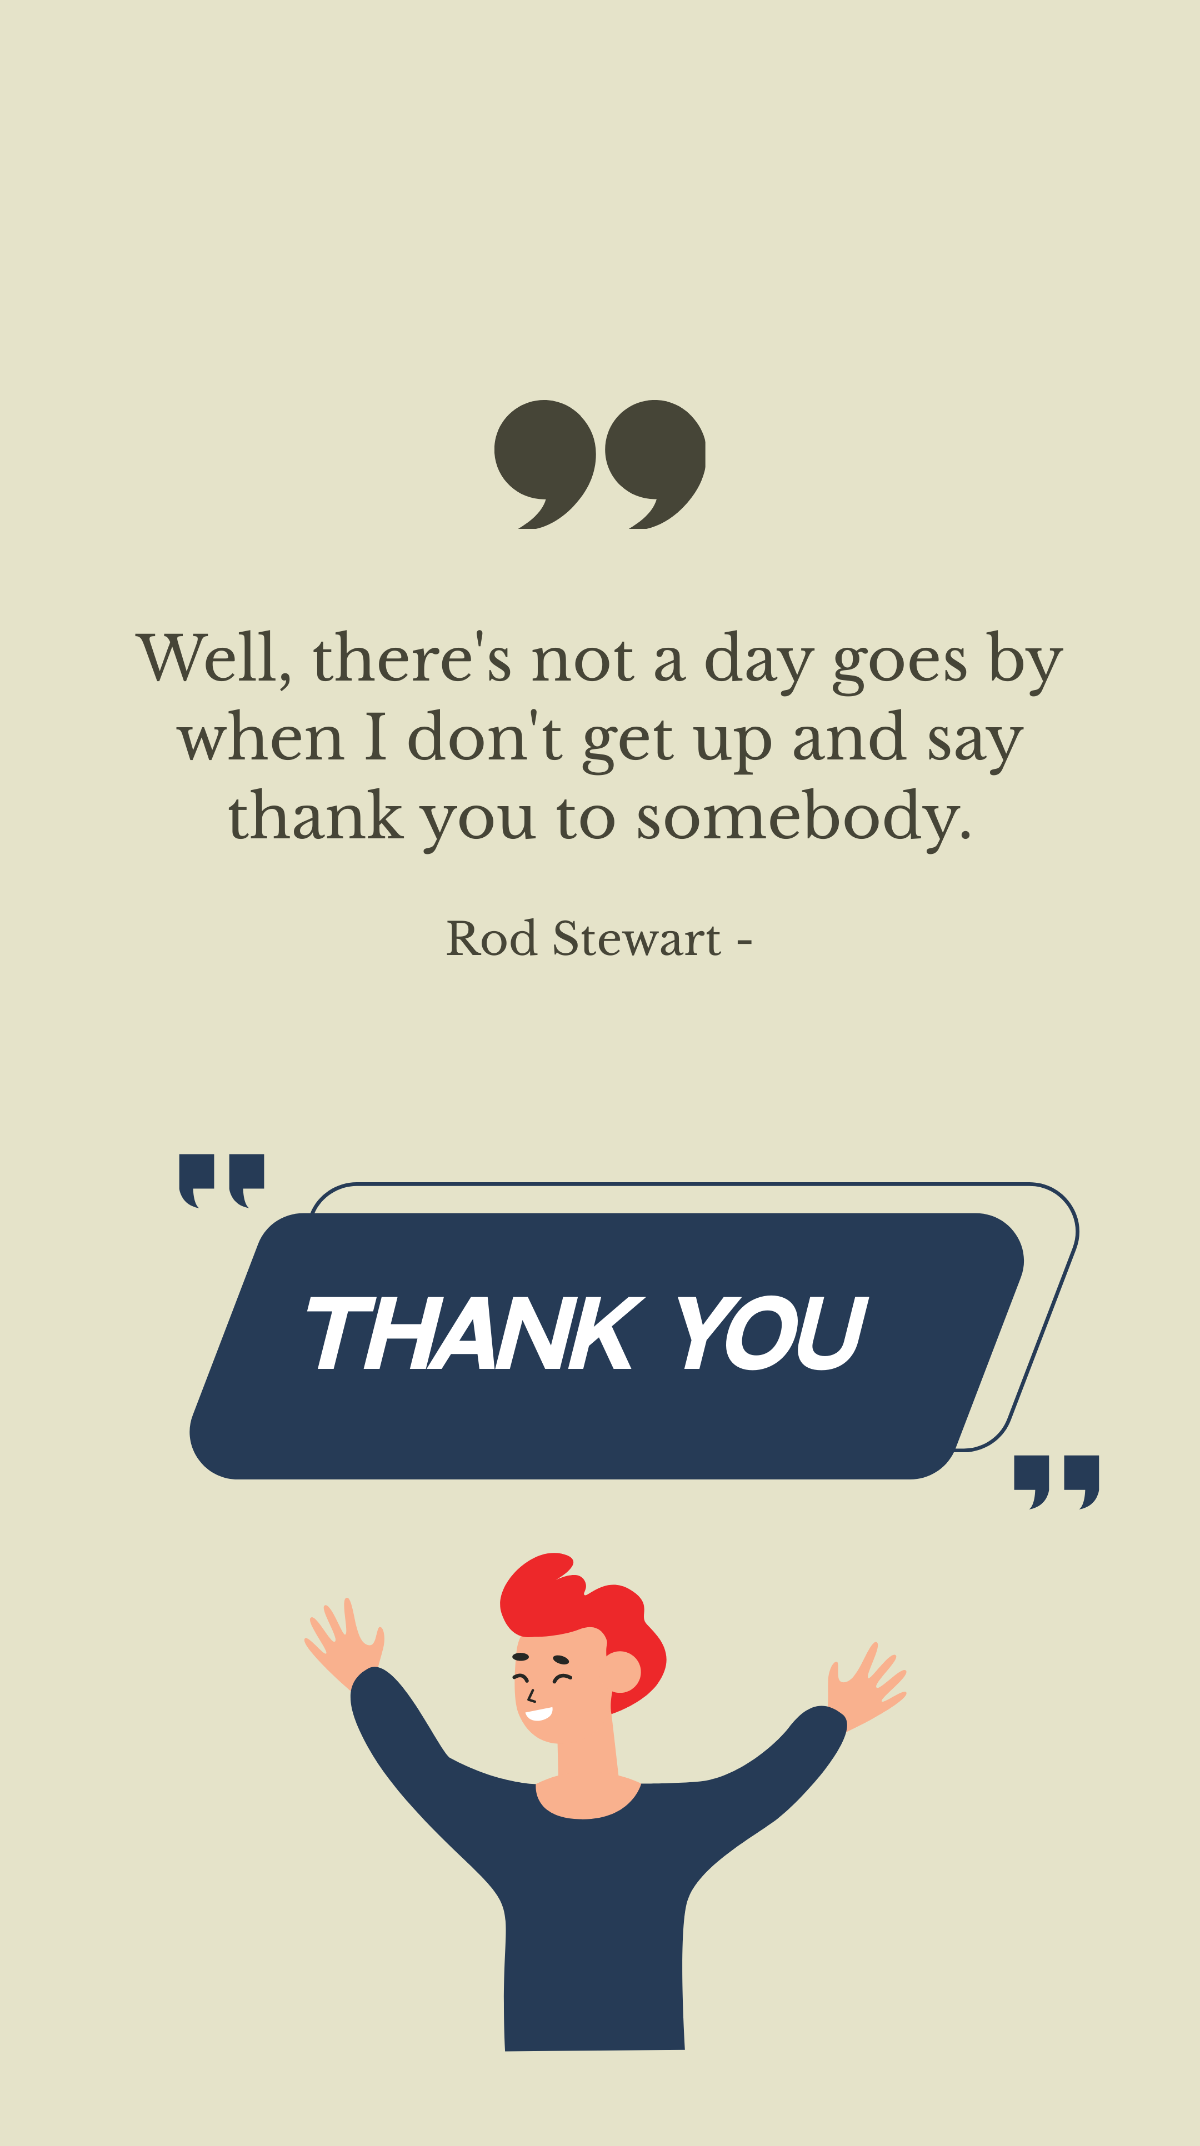 Rod Stewart - Well, there's not a day goes by when I don't get up and say thank you to somebody. Template